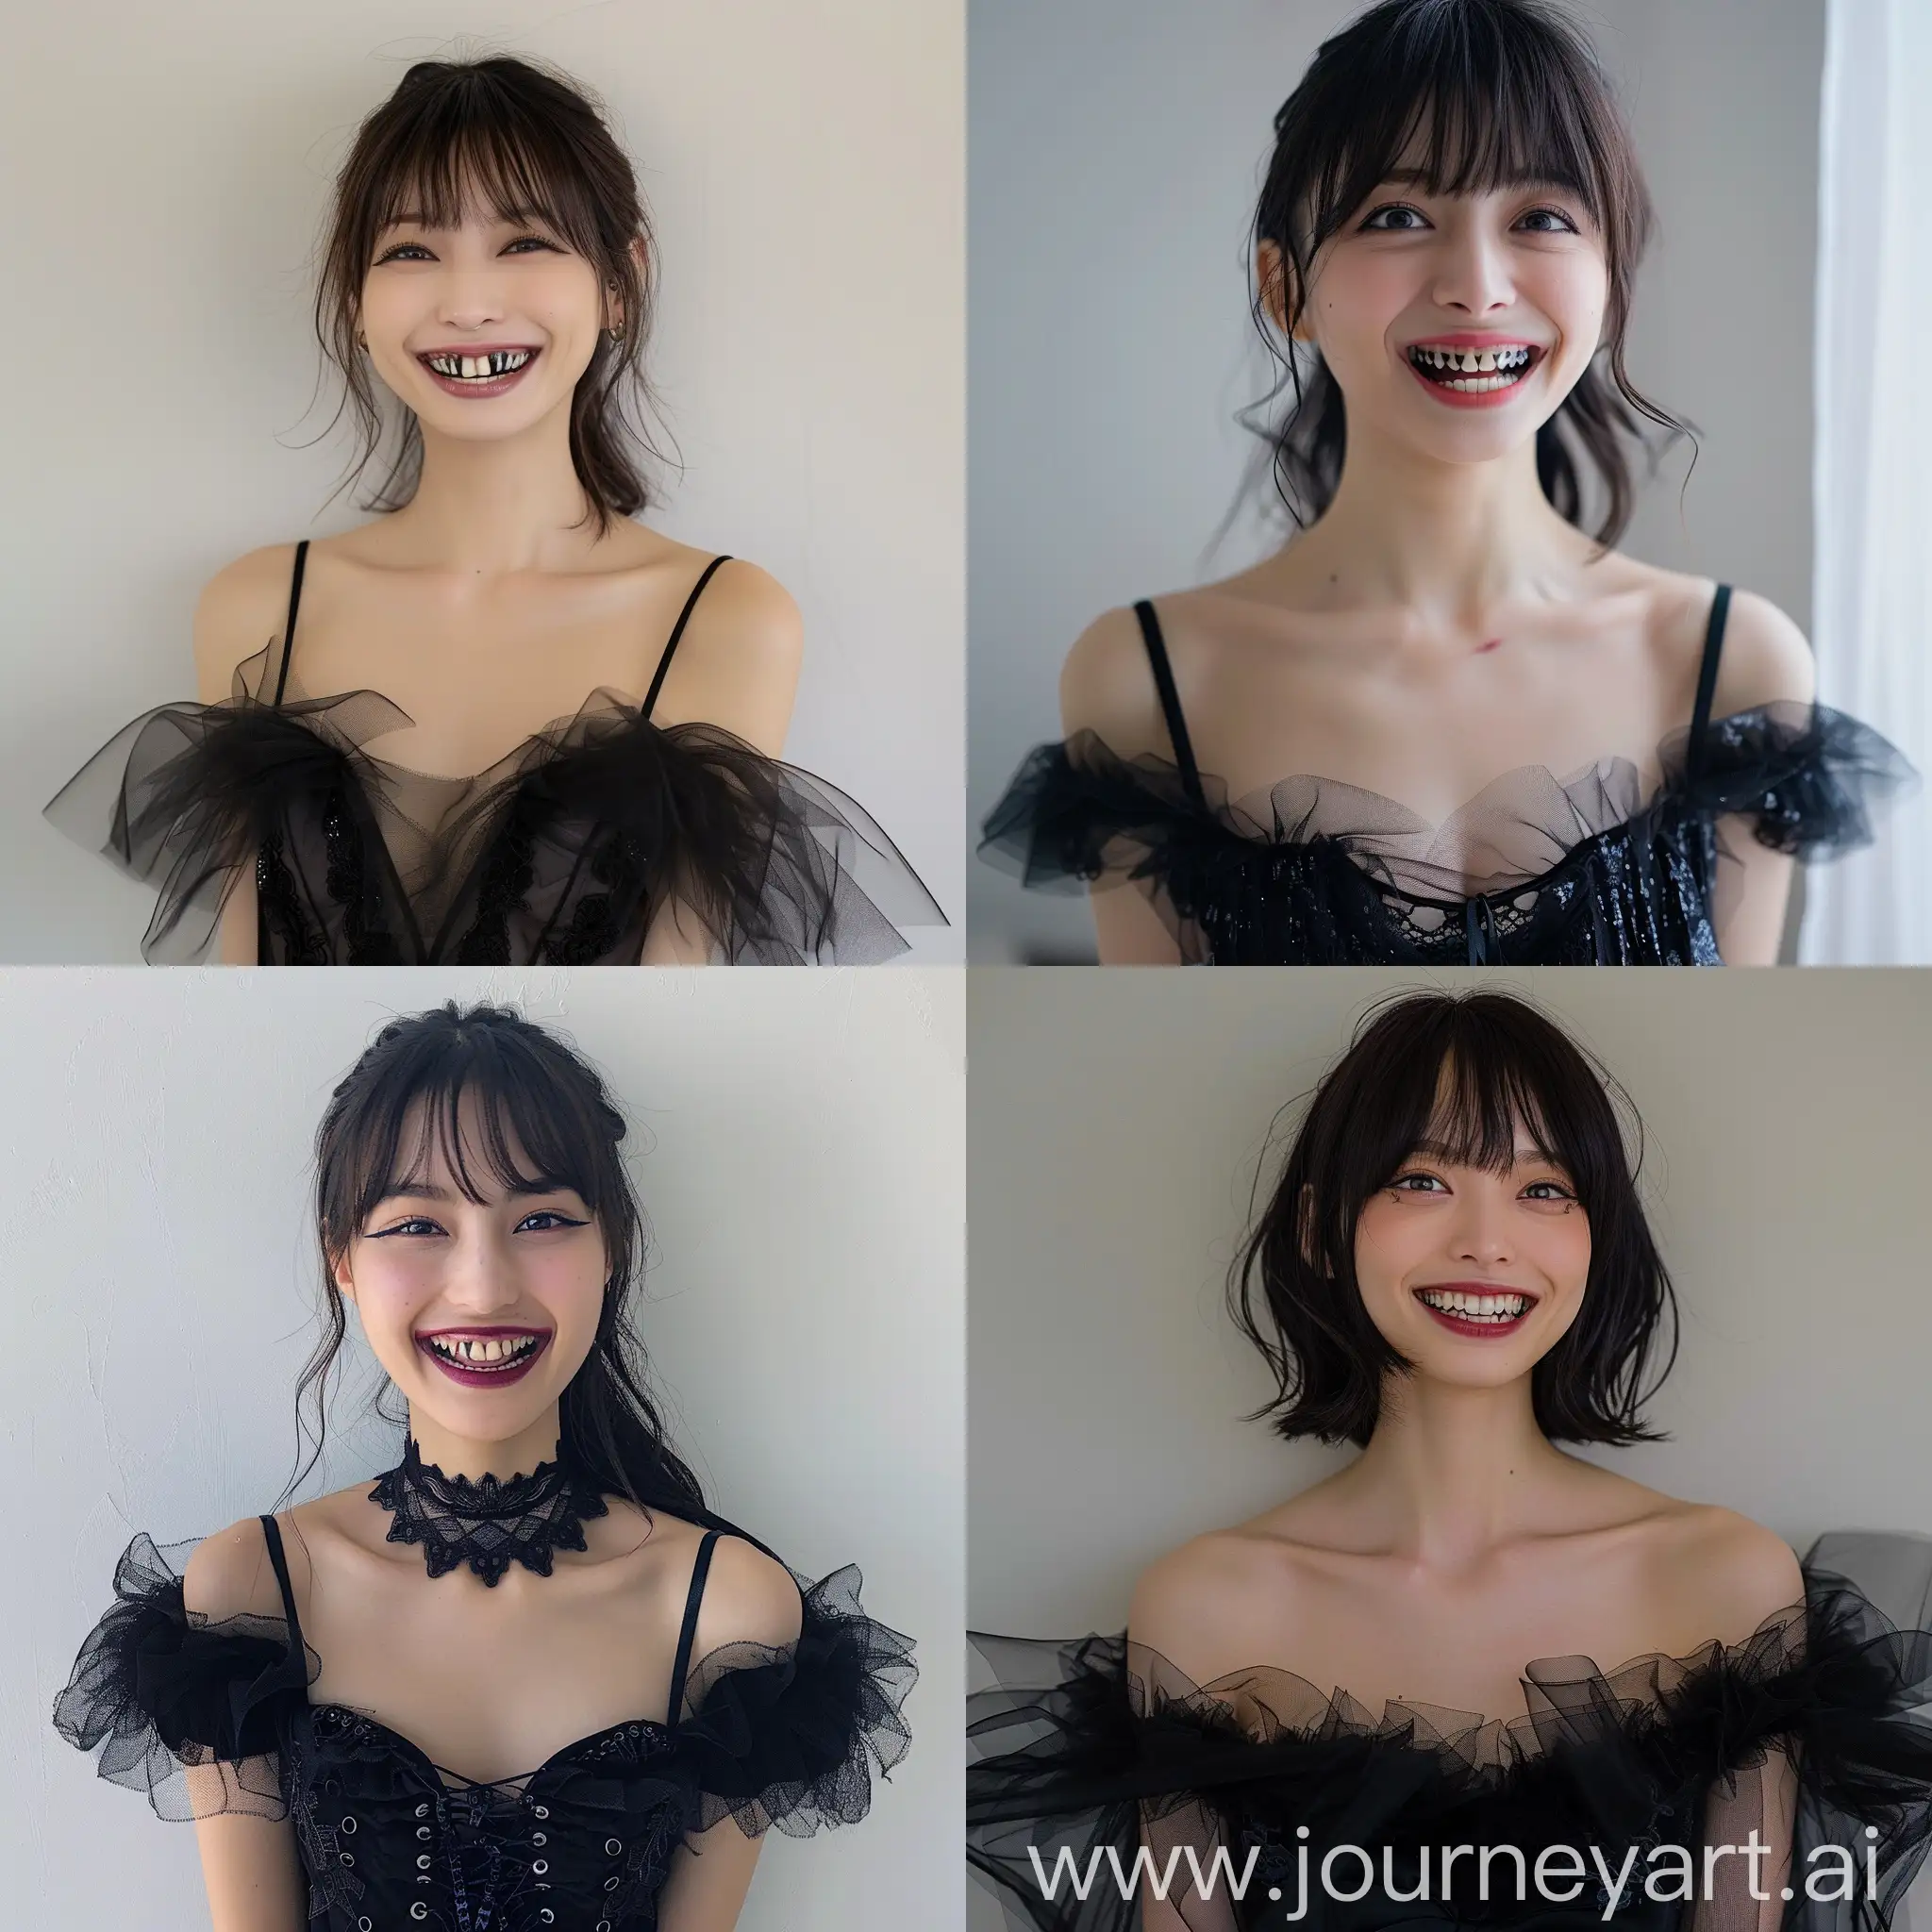 A pretty Japanese woman, narrow face with high cheek-bones, bangs, early 20s, a vampire, who wears a black gossamer dress, smiling, with fangs, dress visible, RPG style